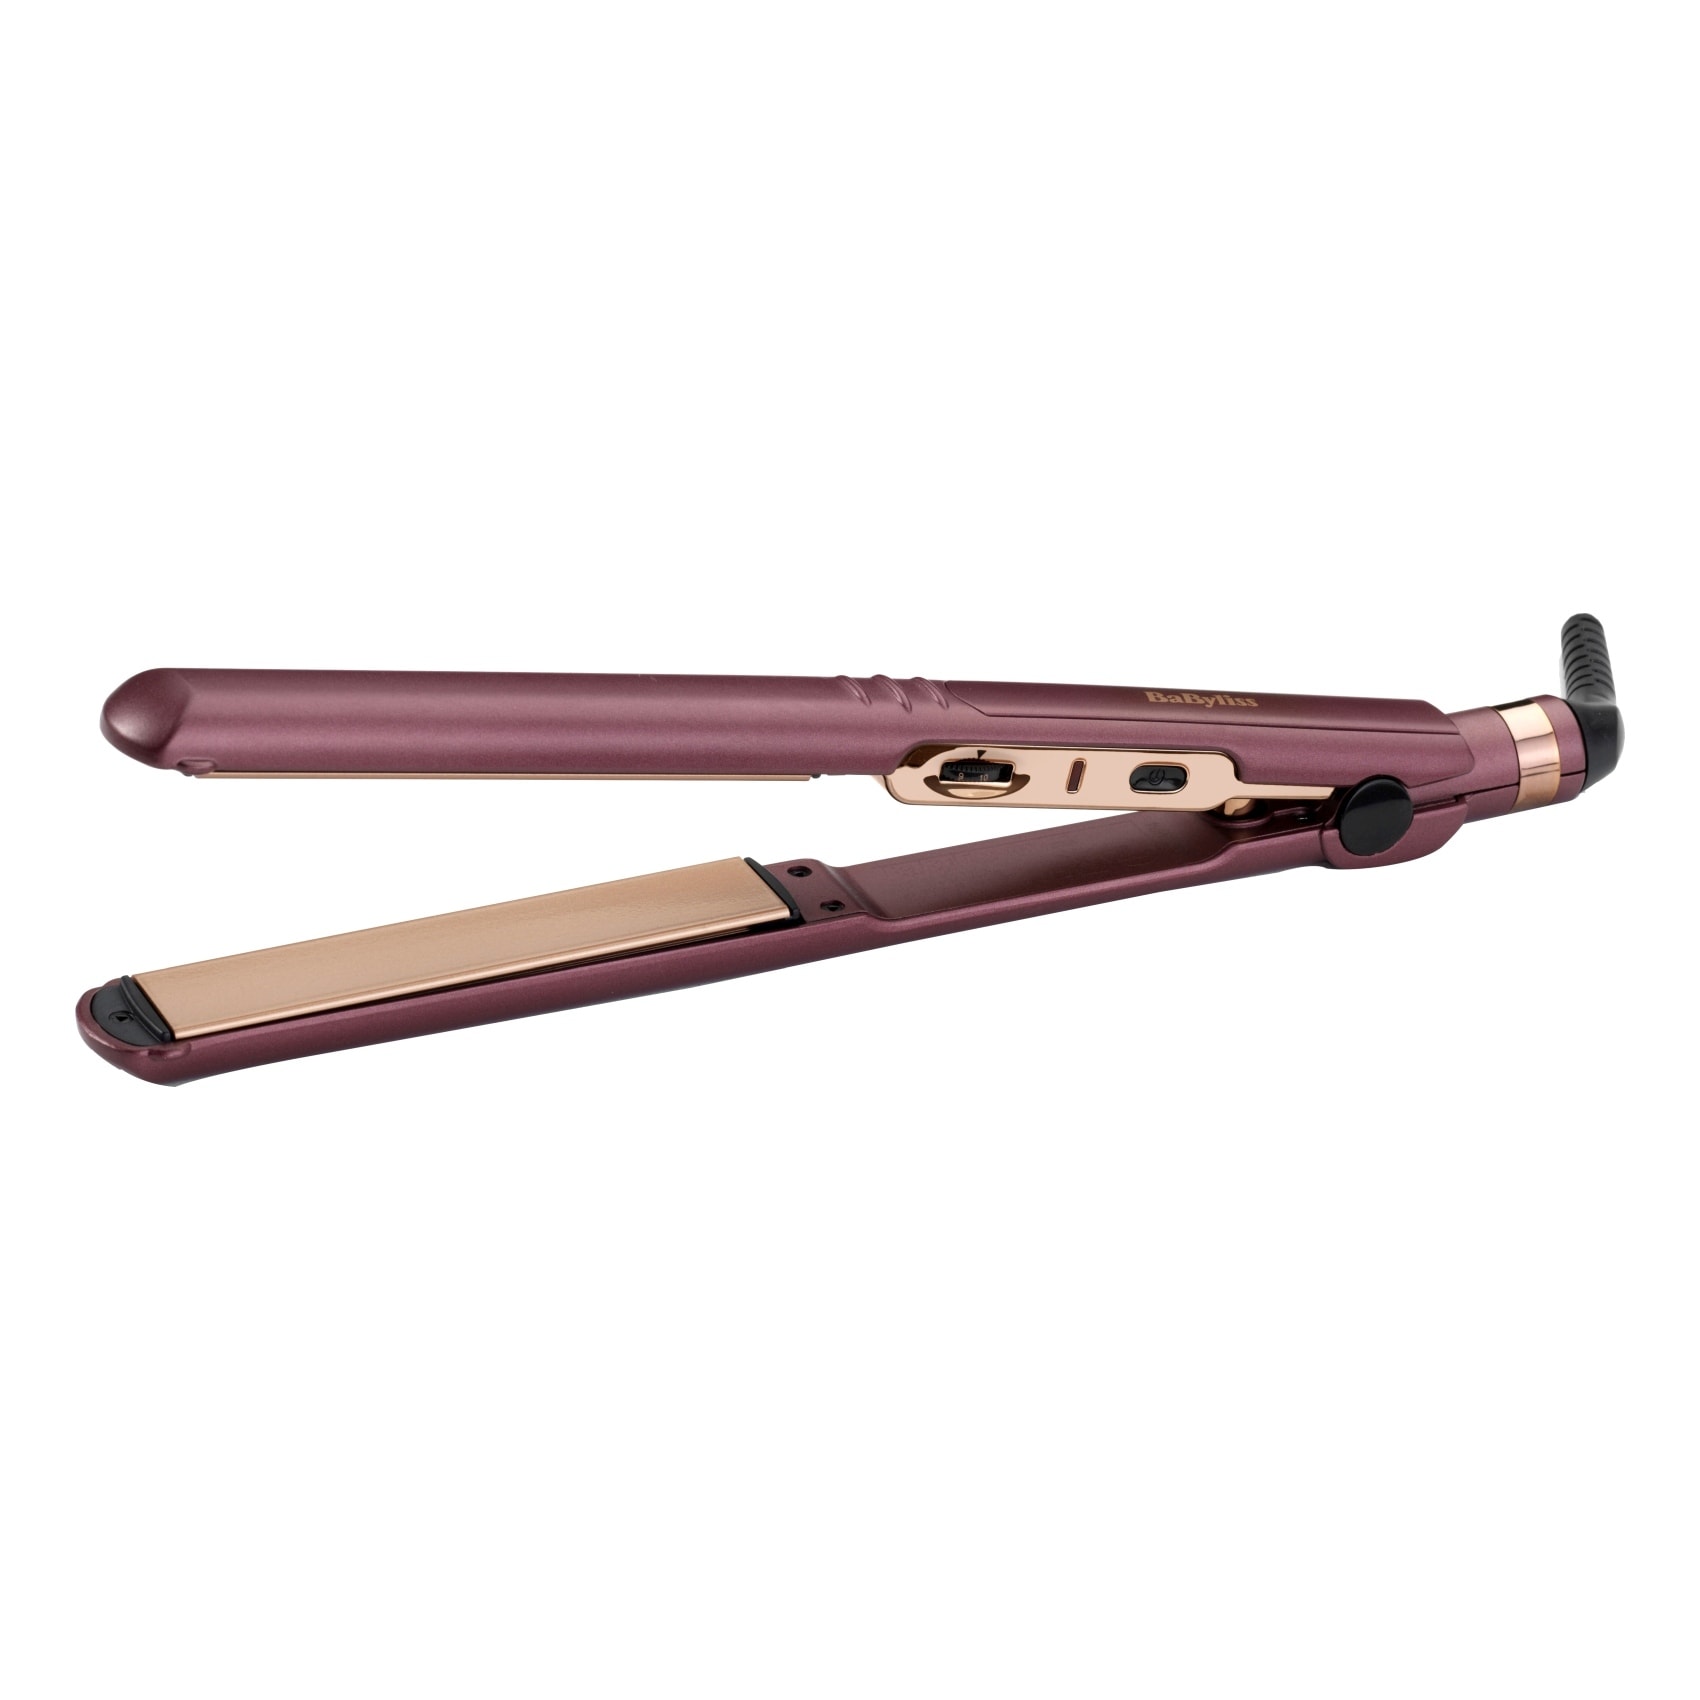 Shop Buy Care & BaByliss - Online Straightener 2183PSDE on Hair Beauty Purple Carrefour Personal UAE